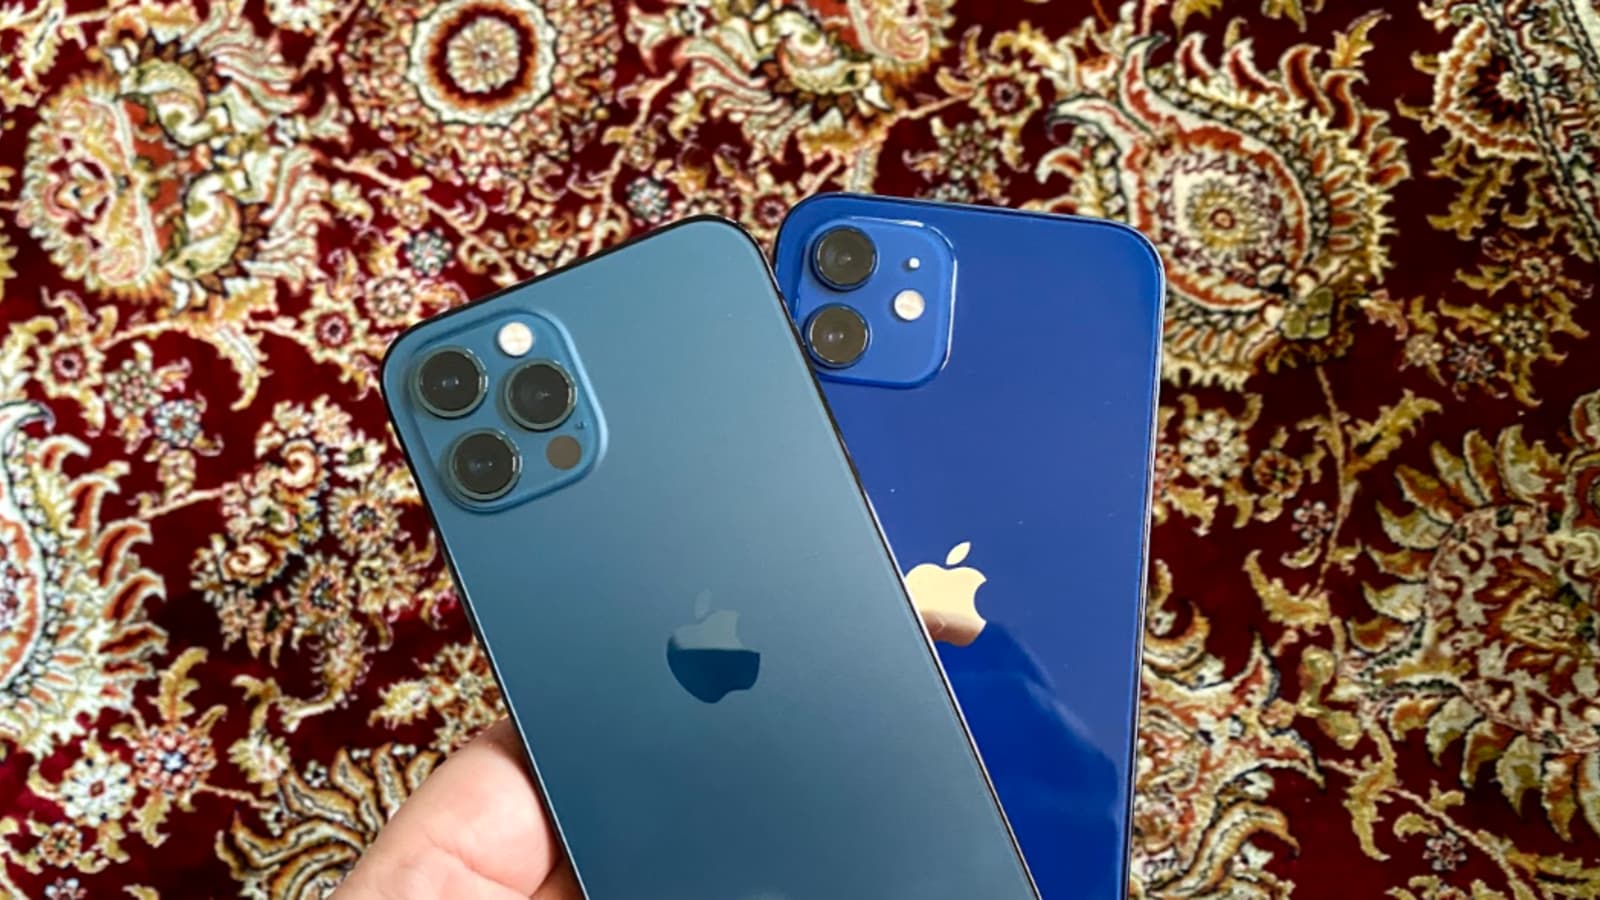 Apple Iphone 12 Vs Iphone 12 Pro Review Which One Do I Buy